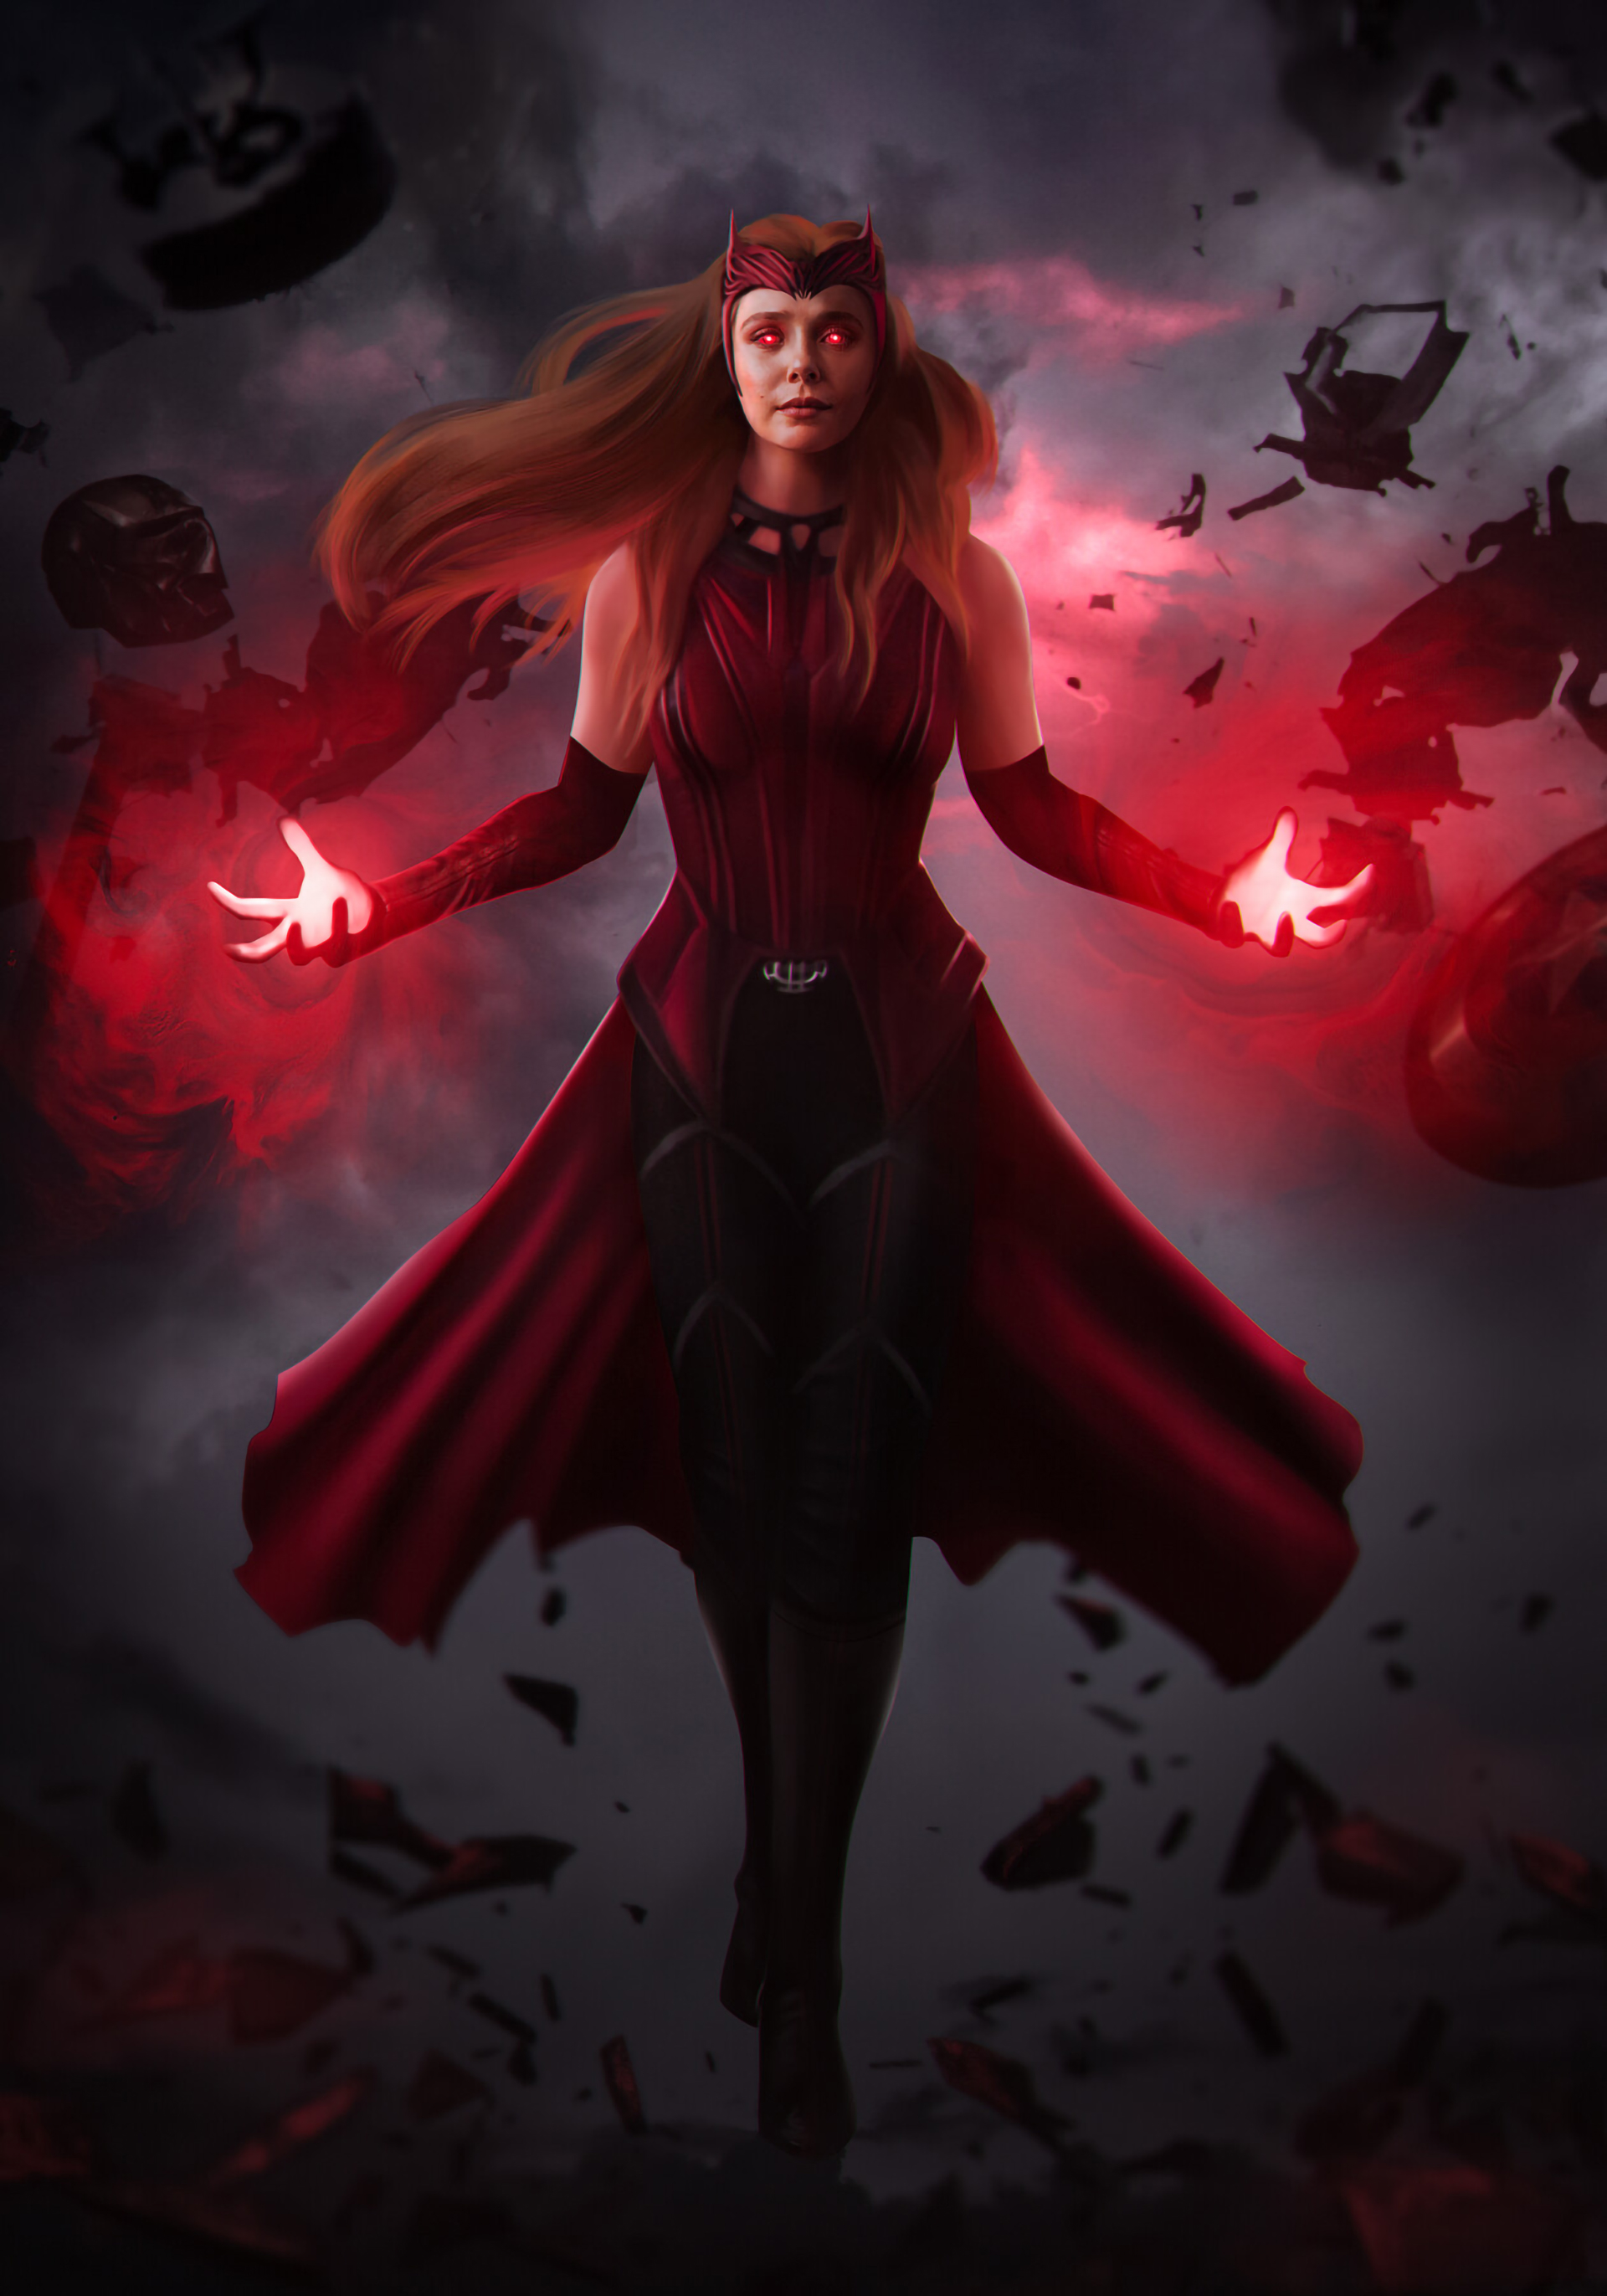 1302x1000 Resolution Scarlet Witch Full Power Mode 1302x1000 Resolution ...